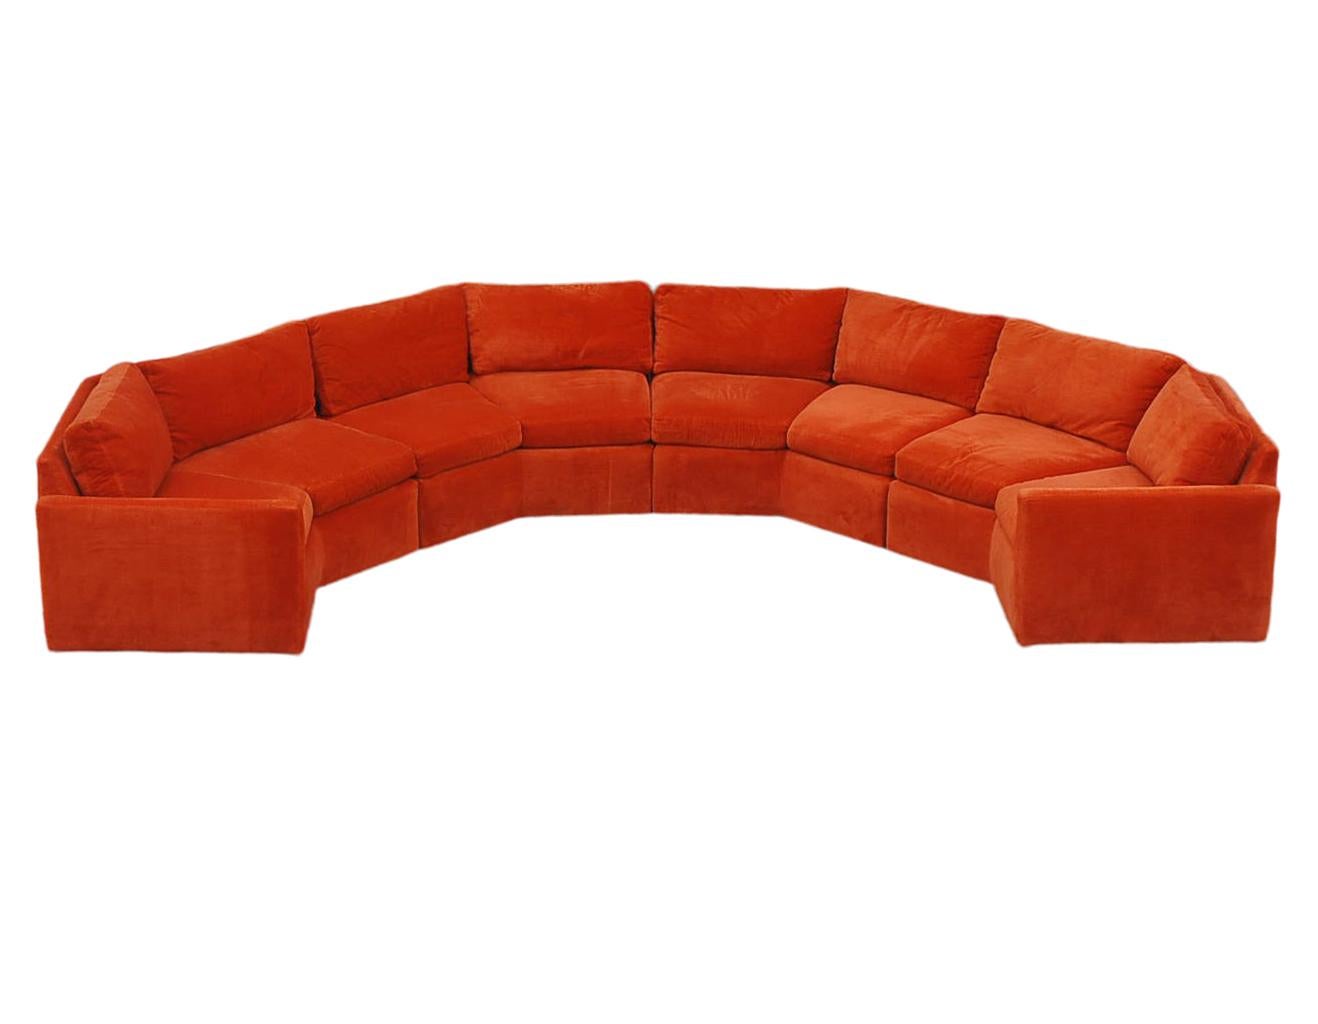 A large and impressive semi circular sofa designed by Milo Baugman and produced by Bernhardt in the 1970s. It features 4 angular sections retaining it's original orange velour upholstery. Reupholstery is recommended as there is a small tear in one